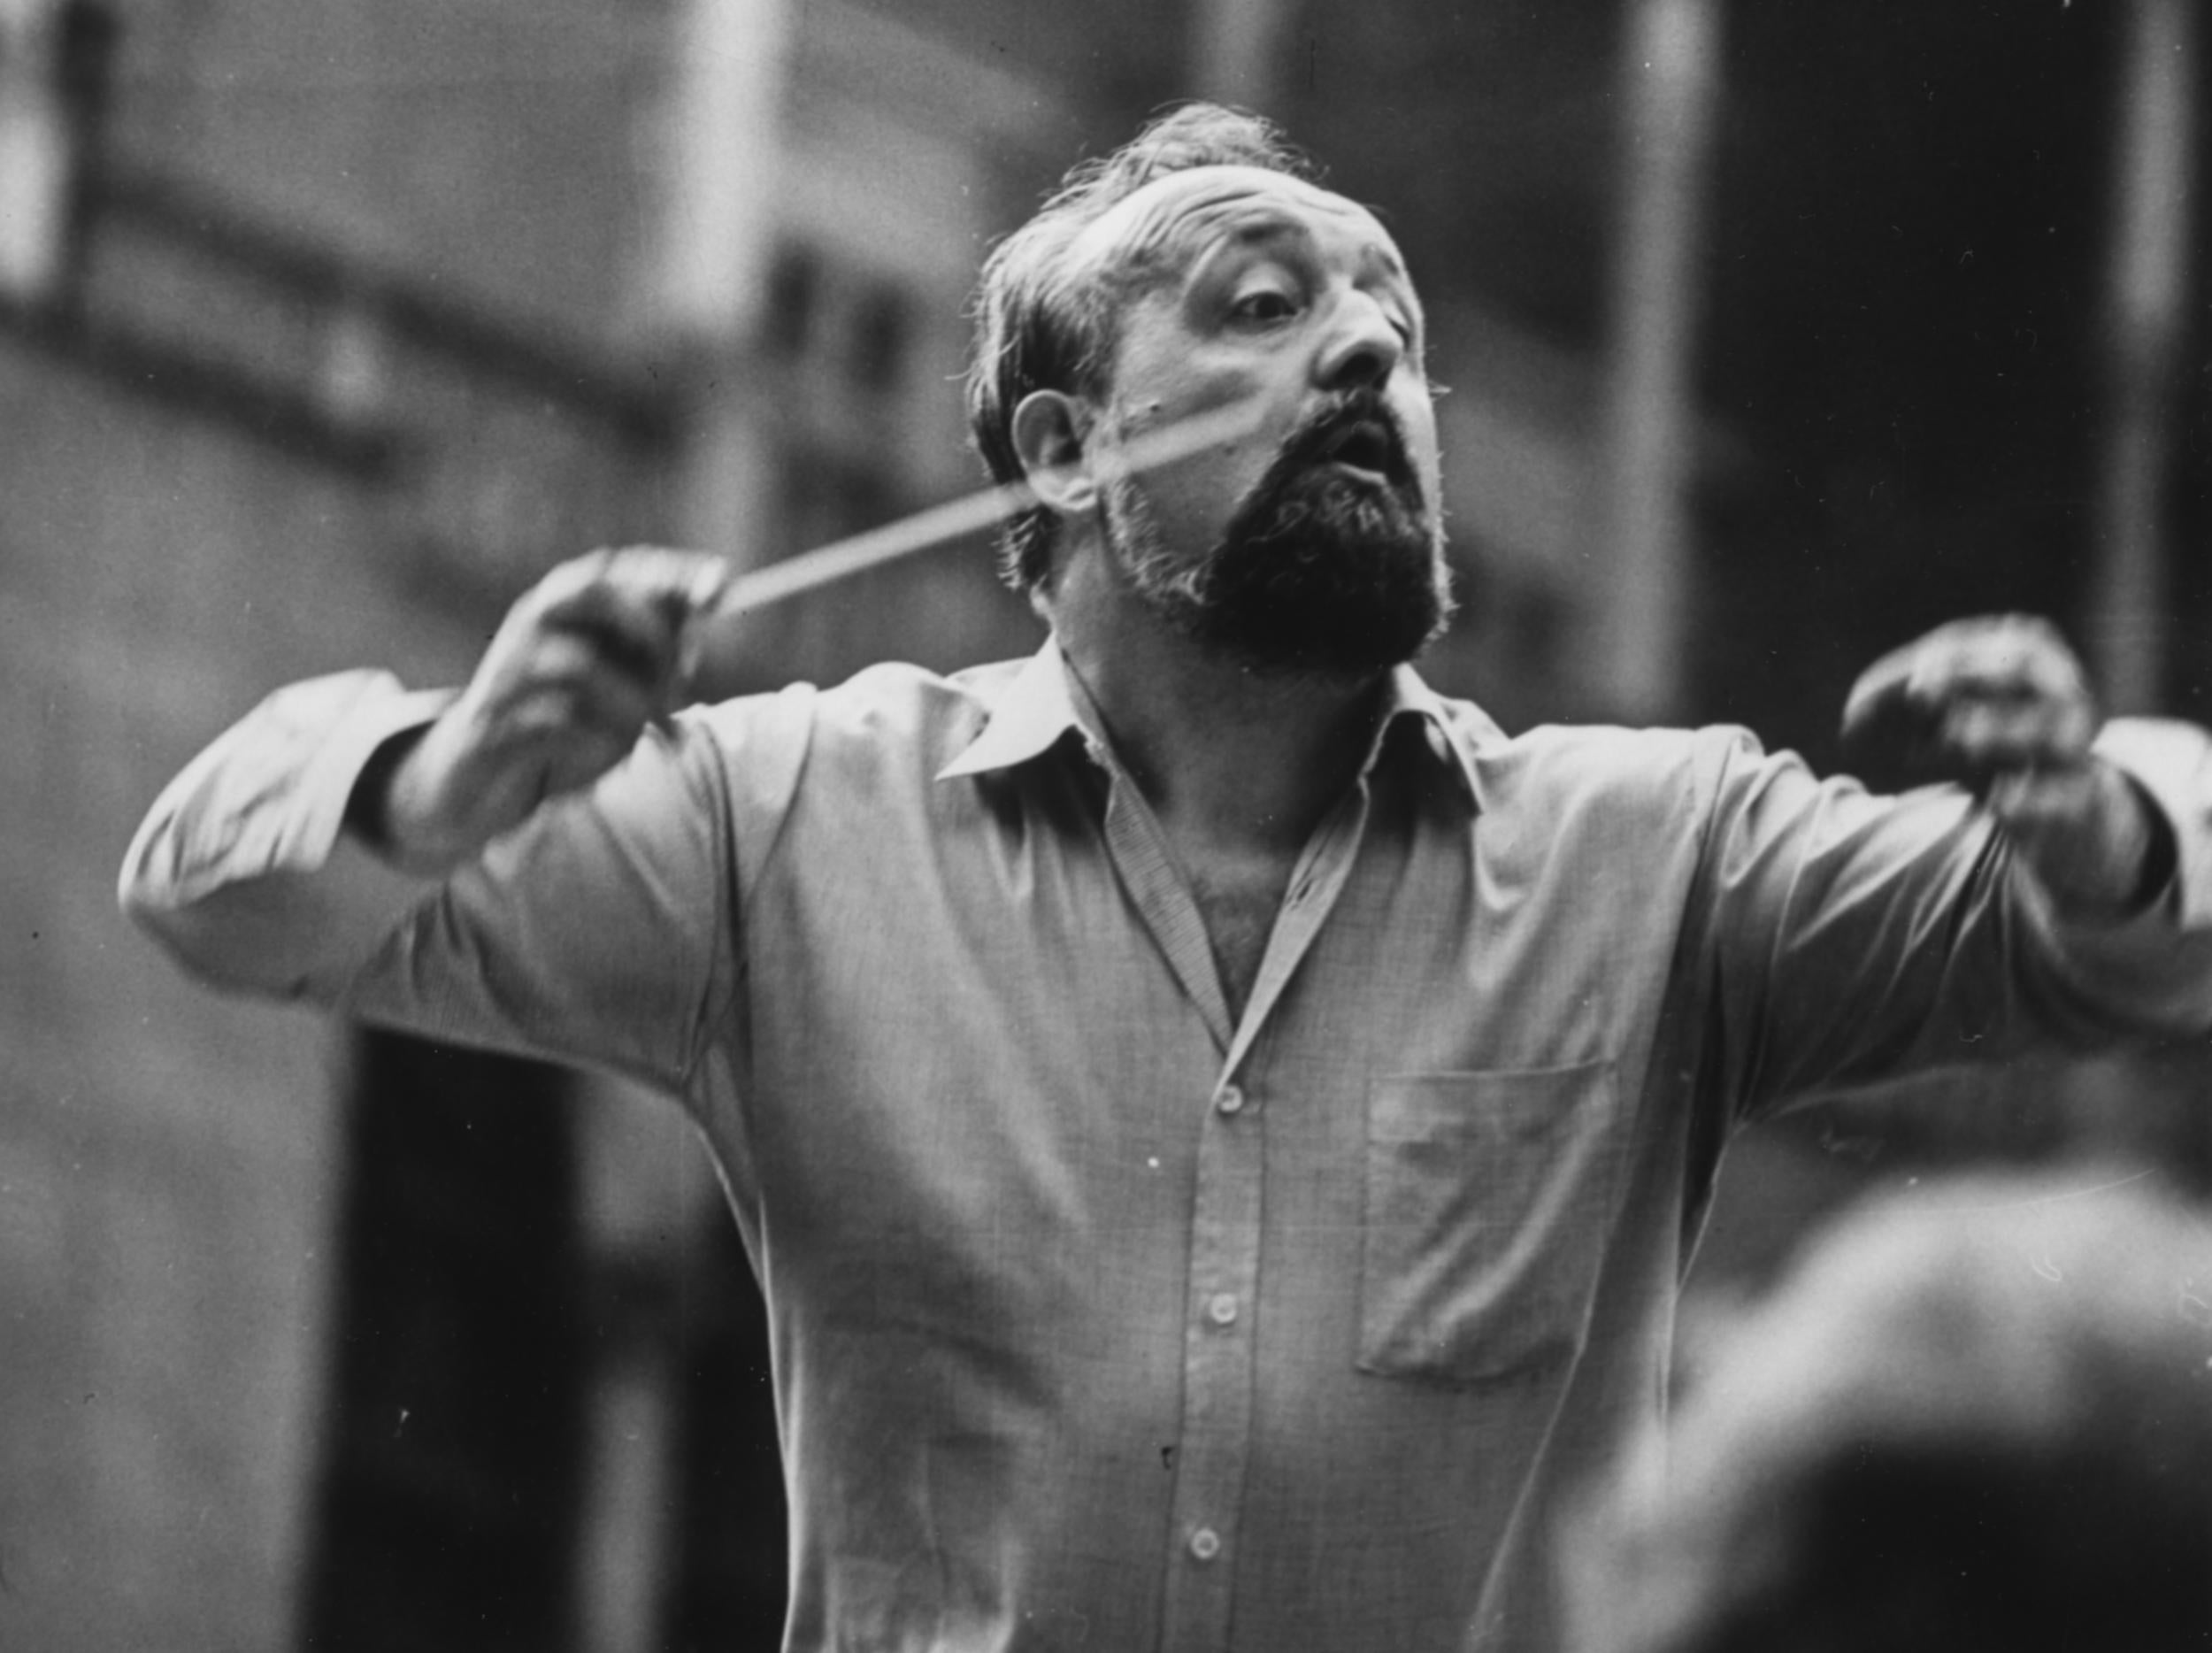 Krzysztof Penderecki: Acclaimed composer known for his foreboding sound